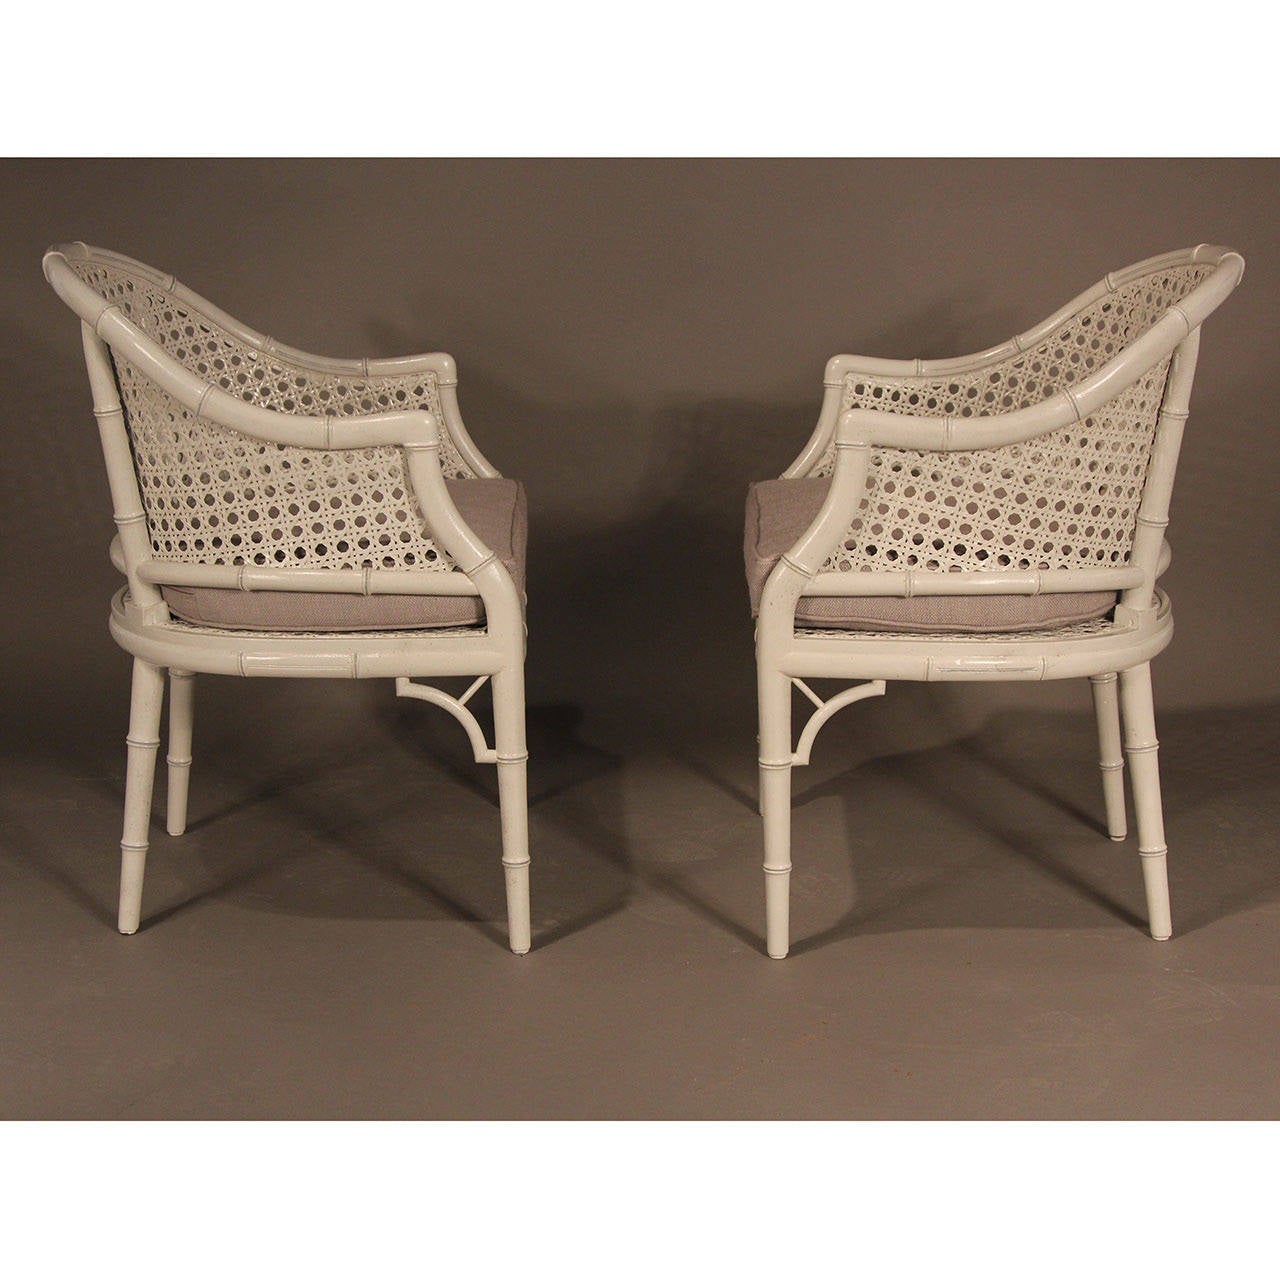 Pair of beautifully restored pale gray painted barrel back chairs with darker gray accents. Possibly Henredon. New gray muslin covered cushions.